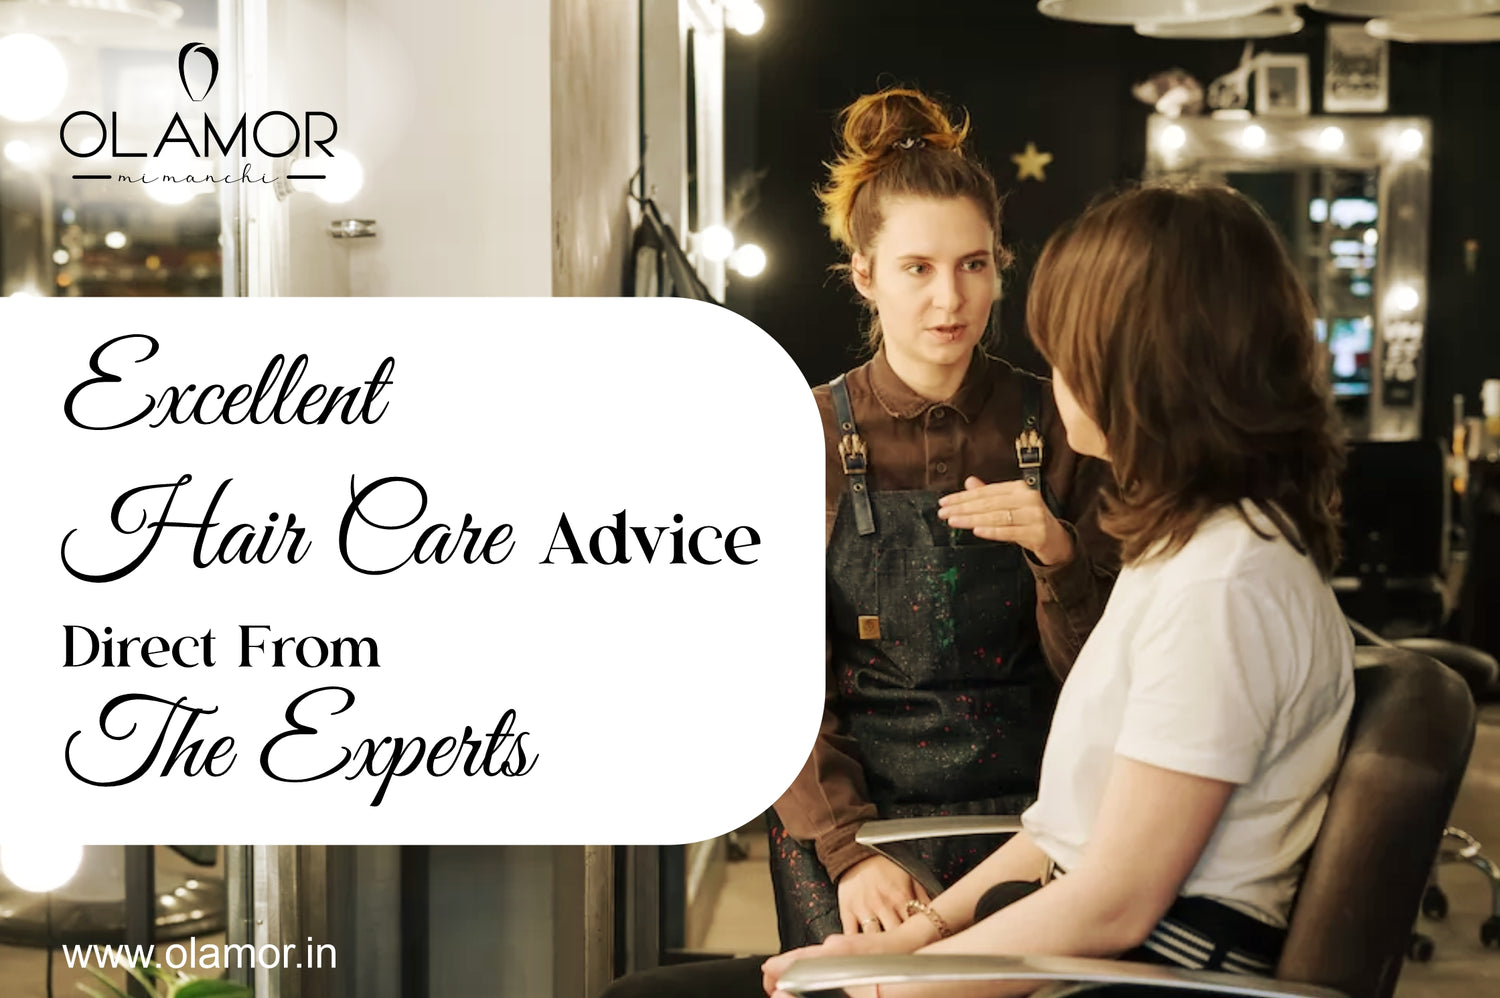 Excellent Hair Care Advice Direct From The Experts